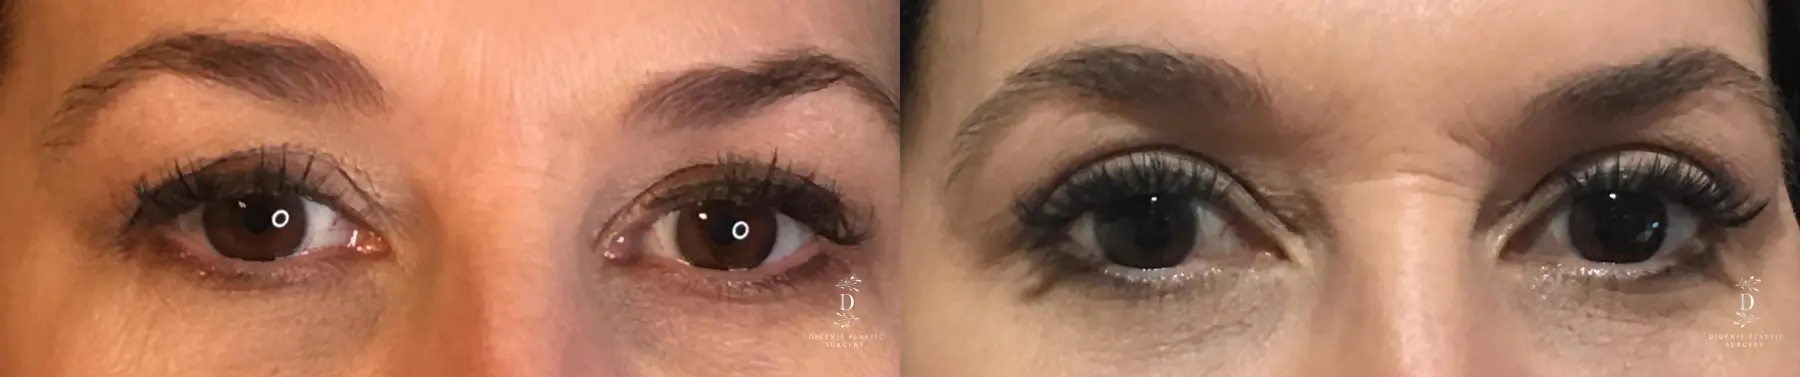 Eyelid Surgery: Patient 30 - Before and After 1